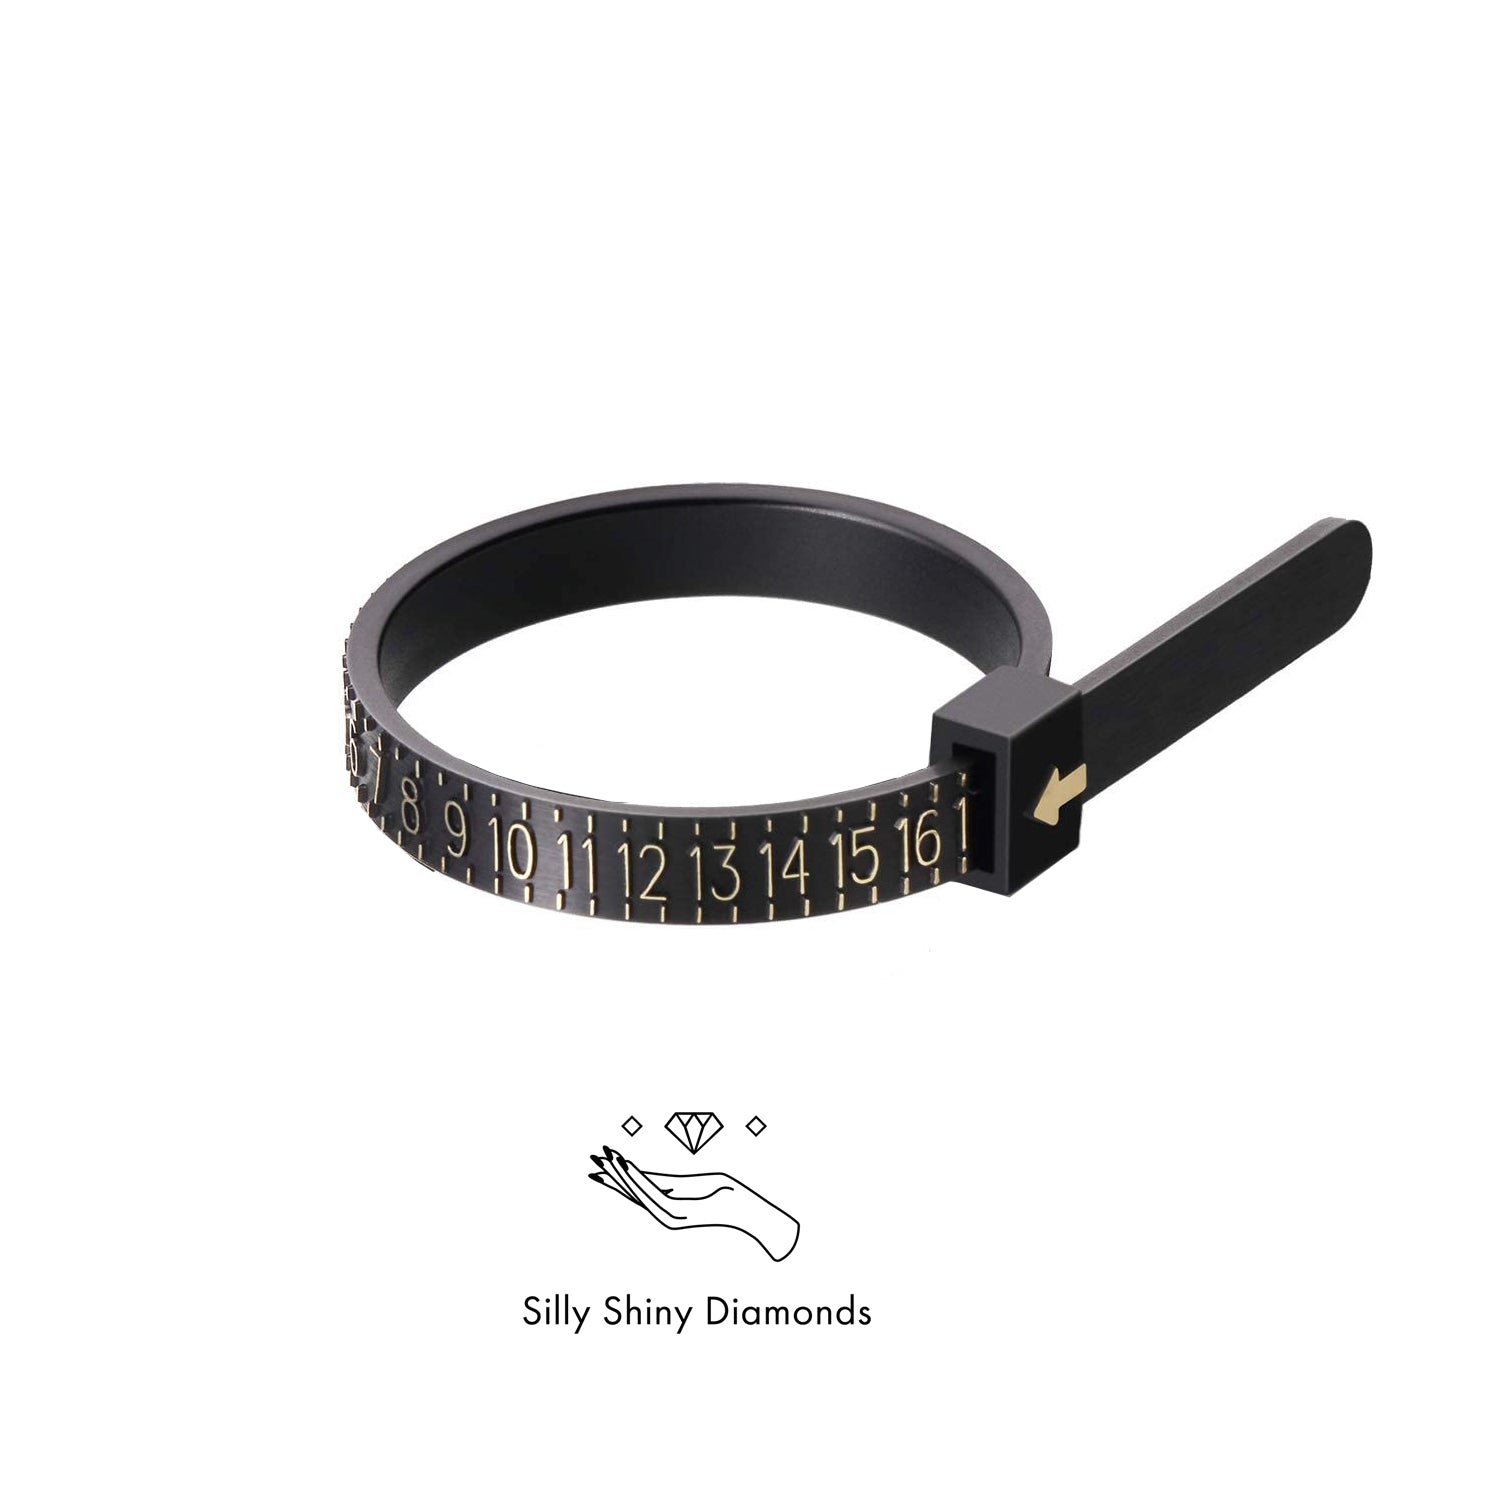 US ring sizer by Silly Shiny Diamonds -  Express FedEx shipping with tracking number.